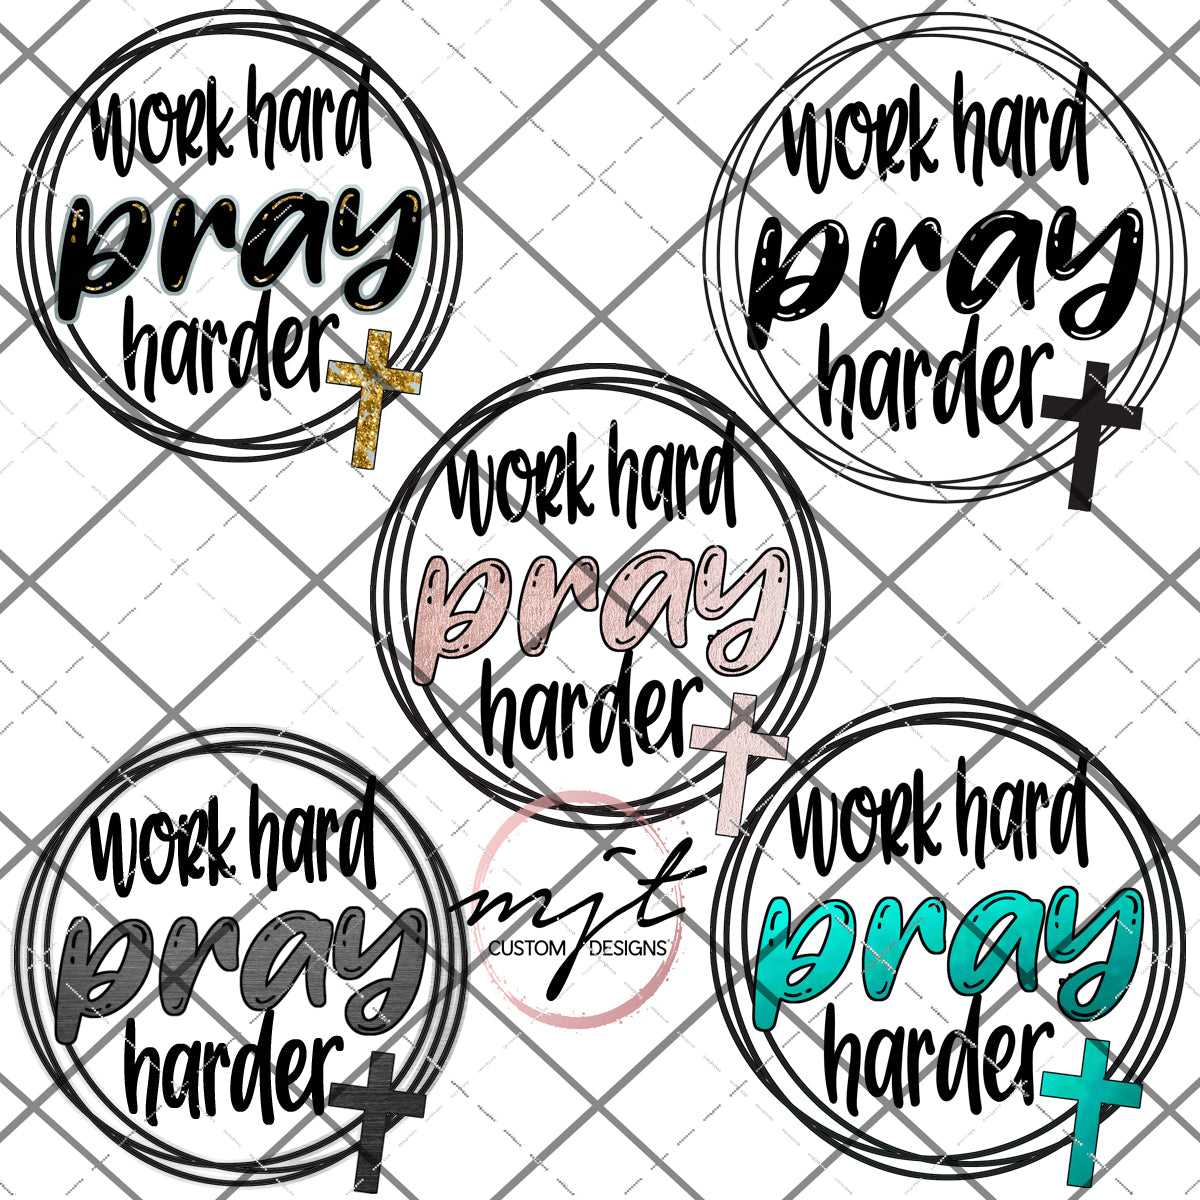 Work Hard Pray Harder - 5 PNG and 1 SVG Files